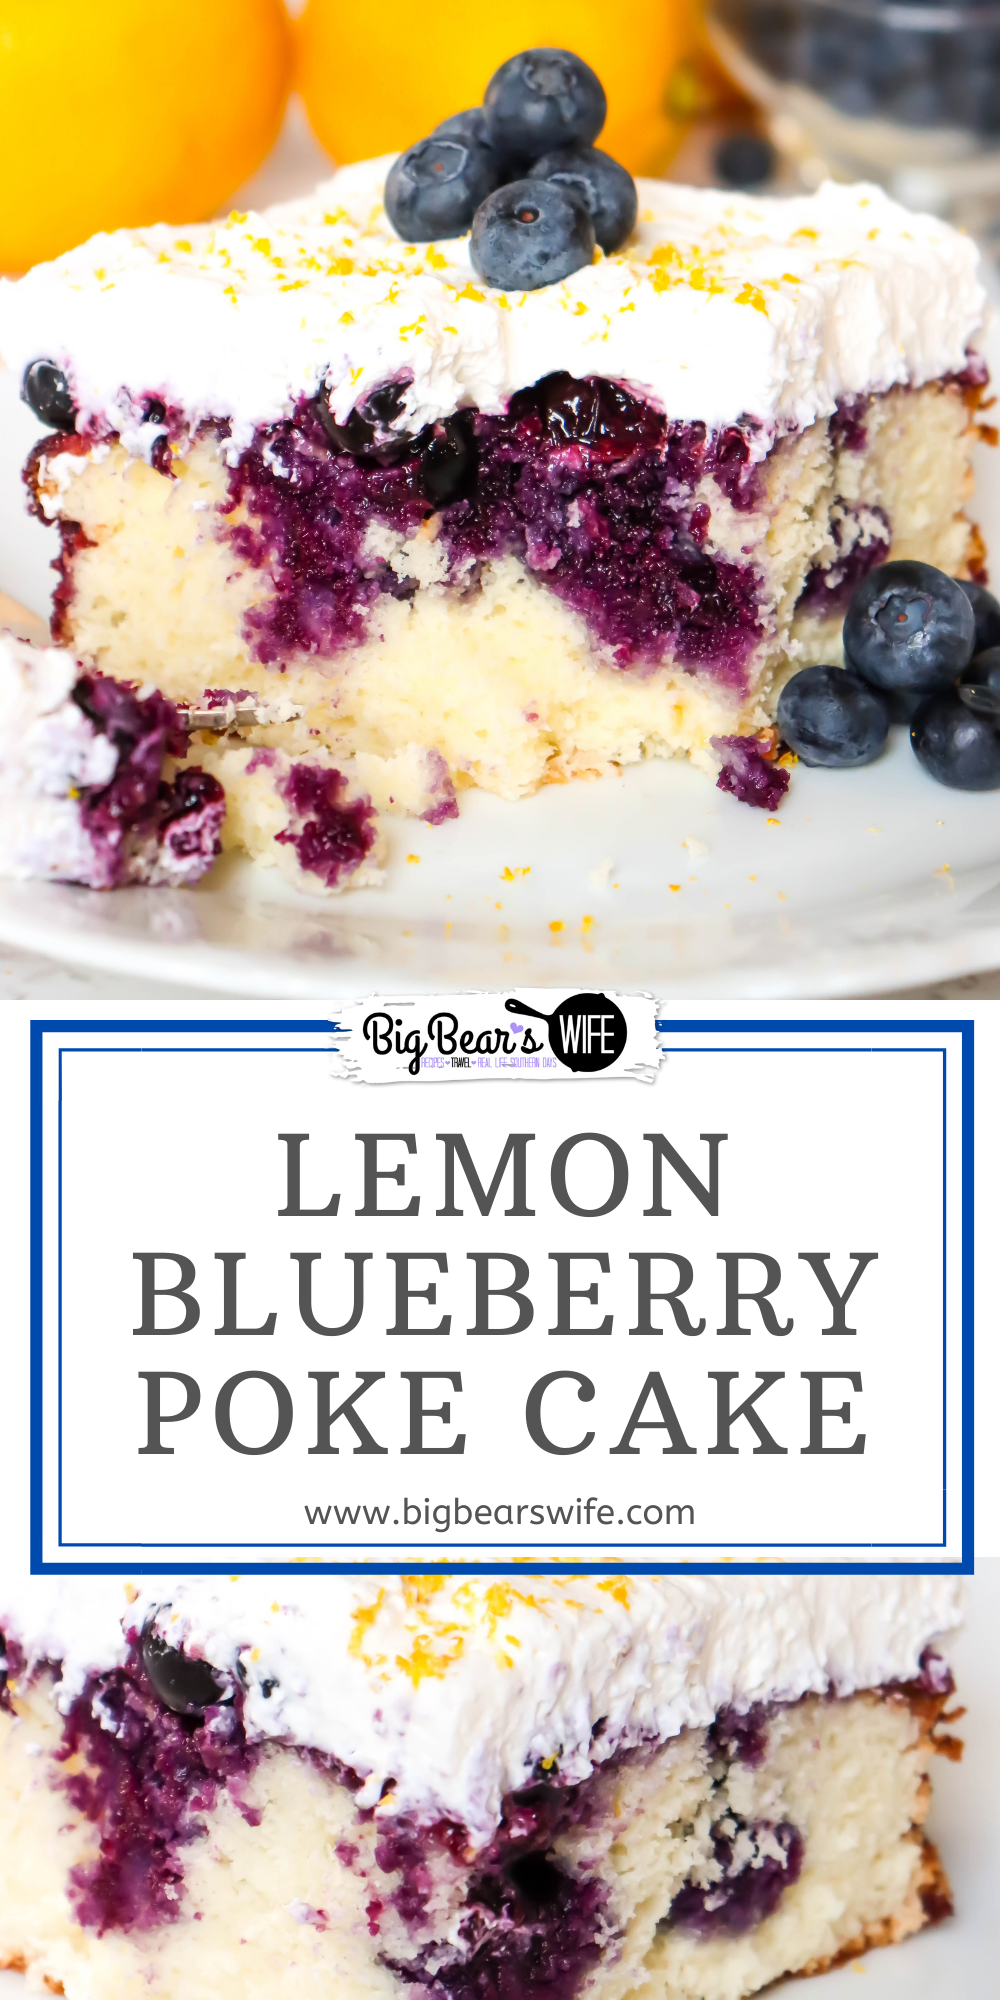 Lemon Blueberry Poke Cake - Welcome spring with this light and fresh lemon poke cake that is topped with a homemade fresh blueberry sauce and lemon crème chantilly!  via @bigbearswife